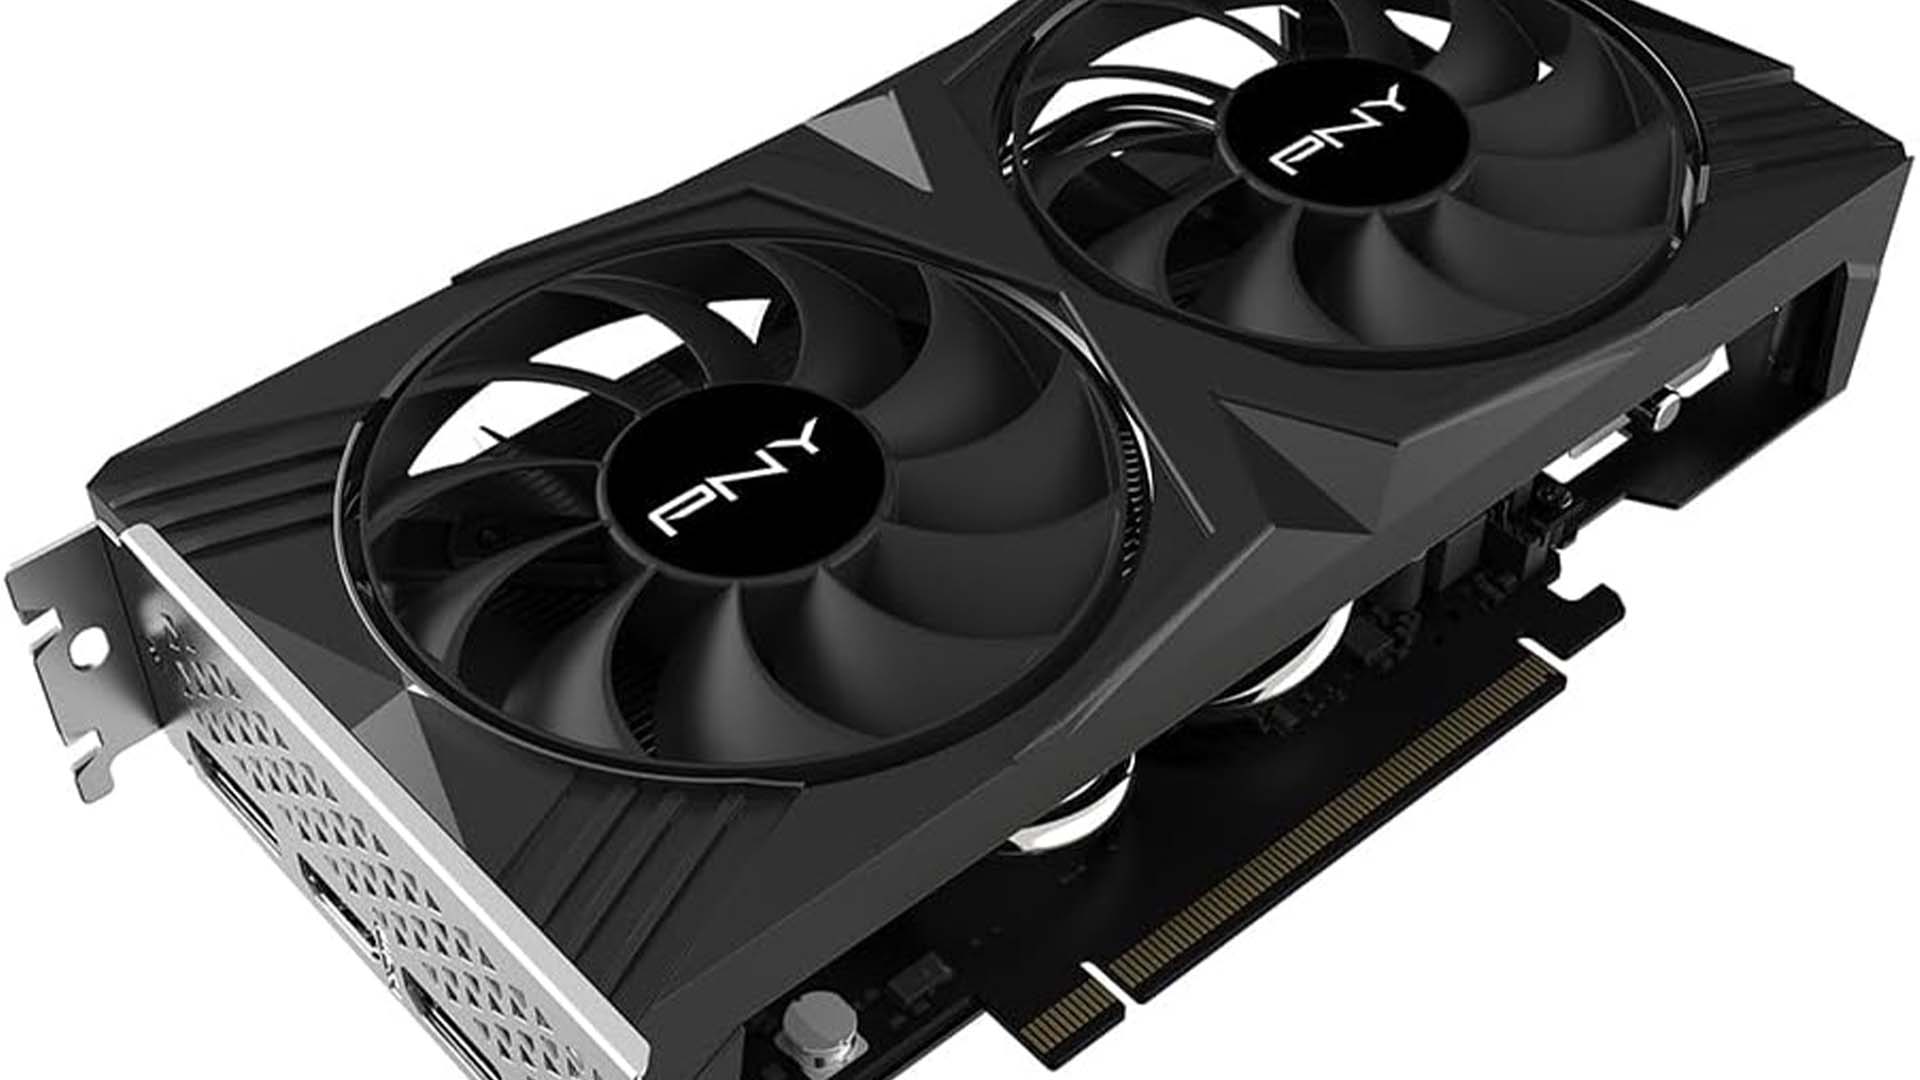 NVIDIA GeForce RTX 4060 Ti (8GB) review: One step forward but two